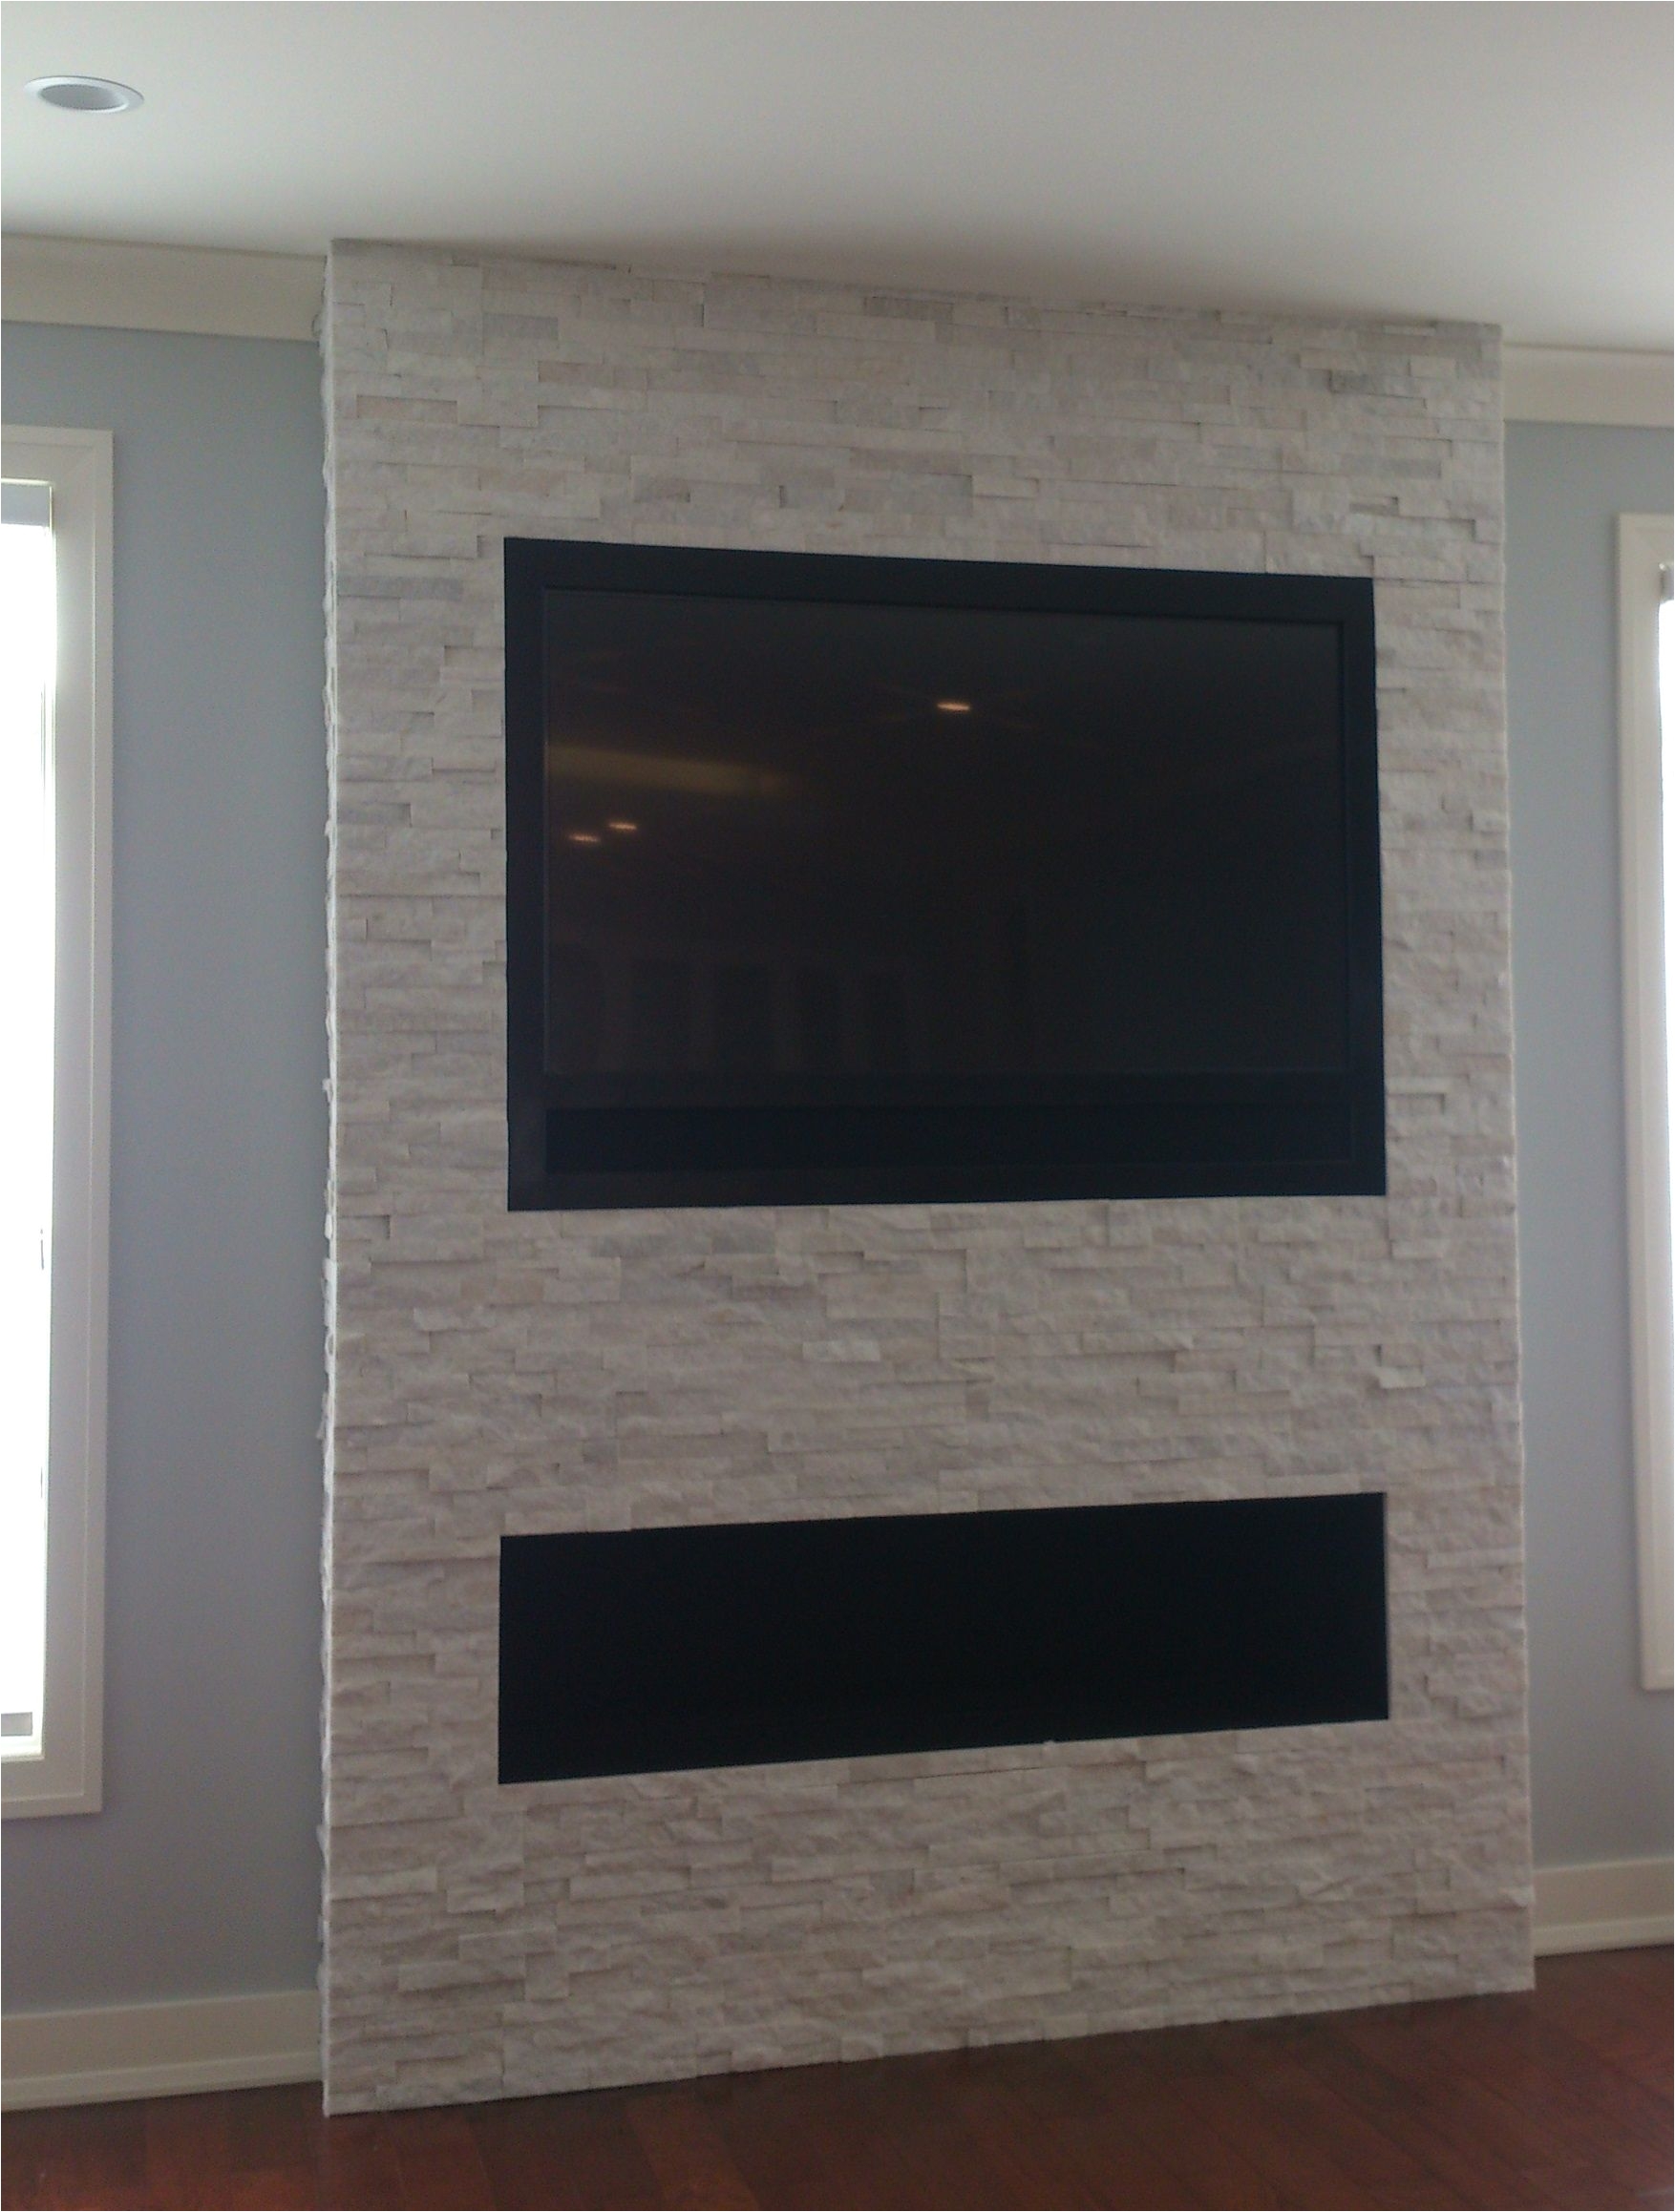 Tv On Fireplace Mantel Elegant Gas Fireplace without Mantle Wondering How to Mount A Tv